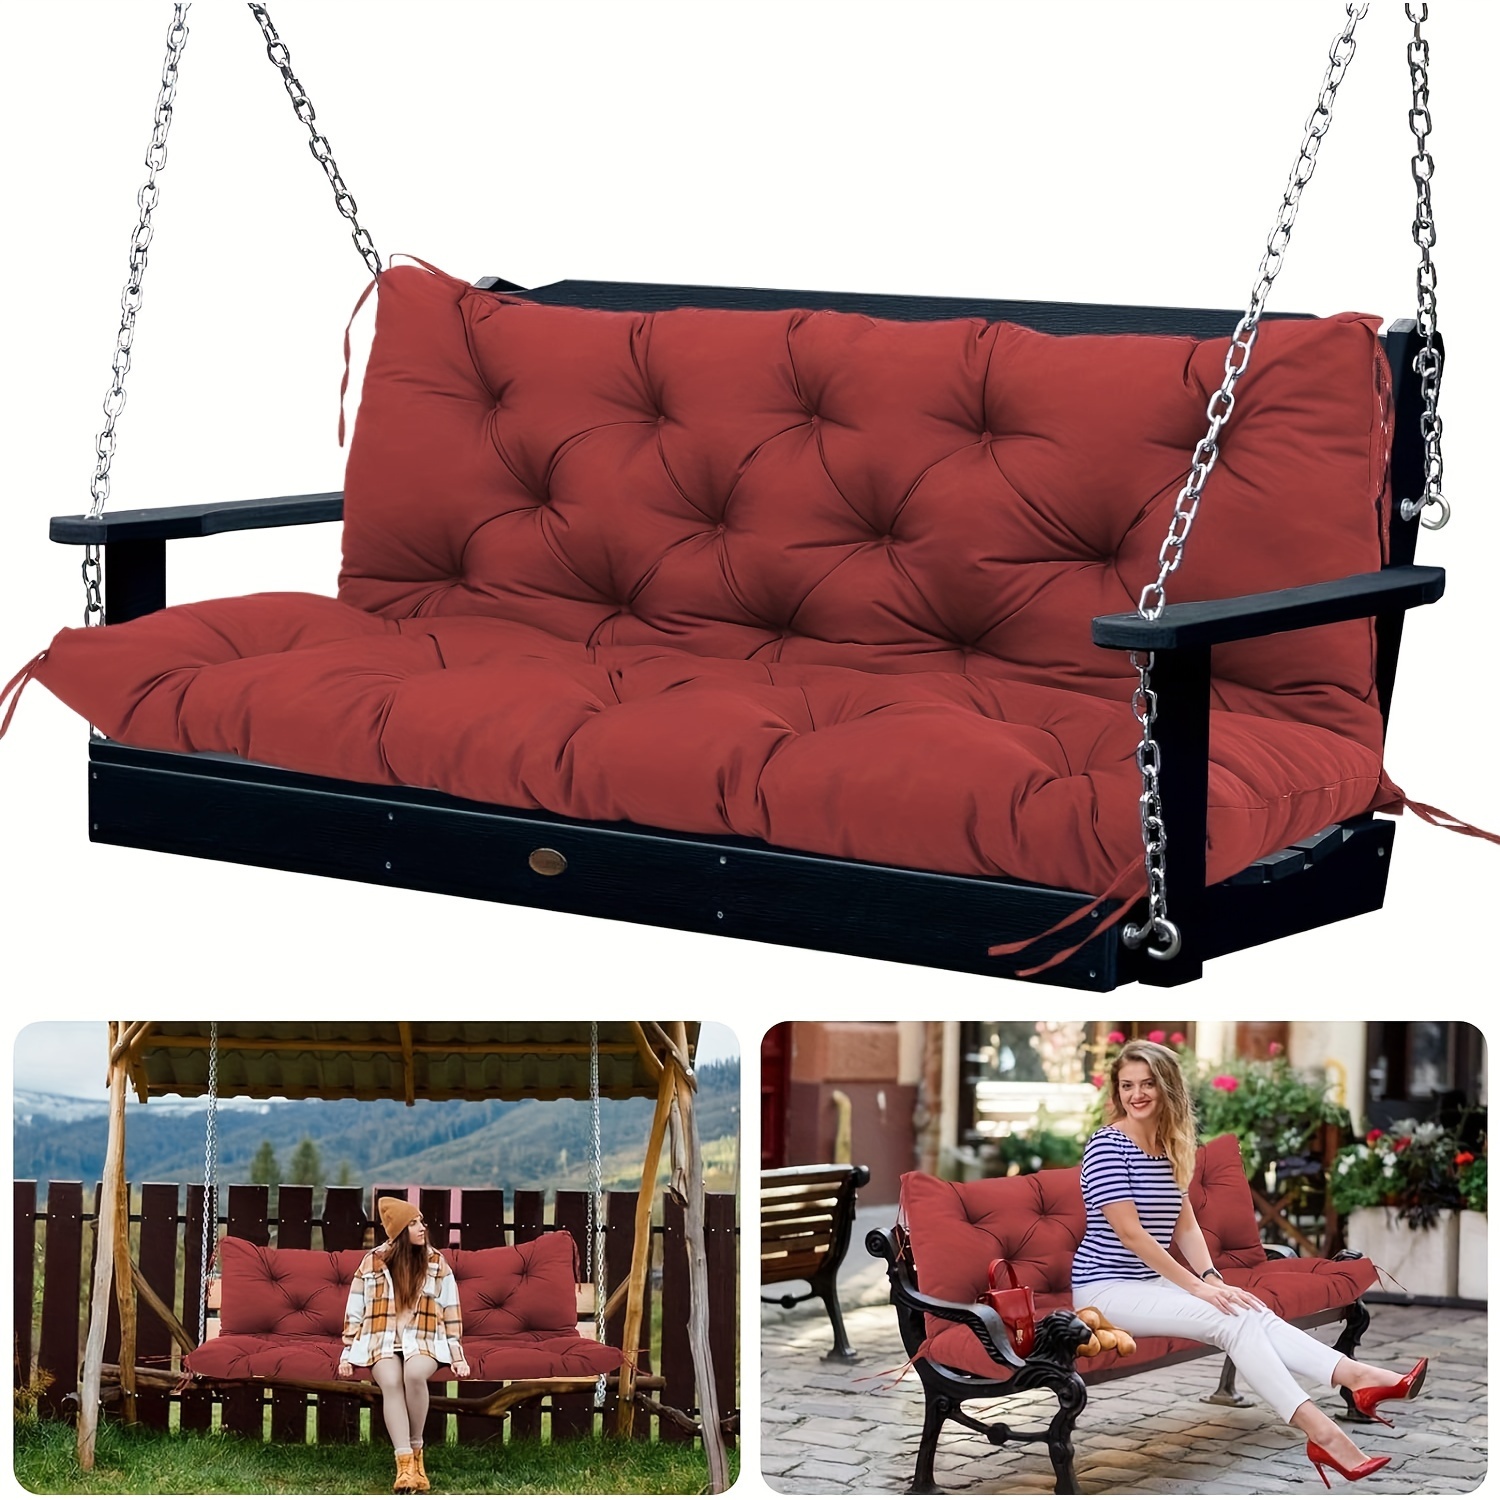 

Outdoor Porch Swing Cushions Waterproof Patio Swing Cushions 3 Seater Replacement With Backrest And Ties Thicken Swing Bench Cushions Replacement For Outdoor Furniture Lawn Garden